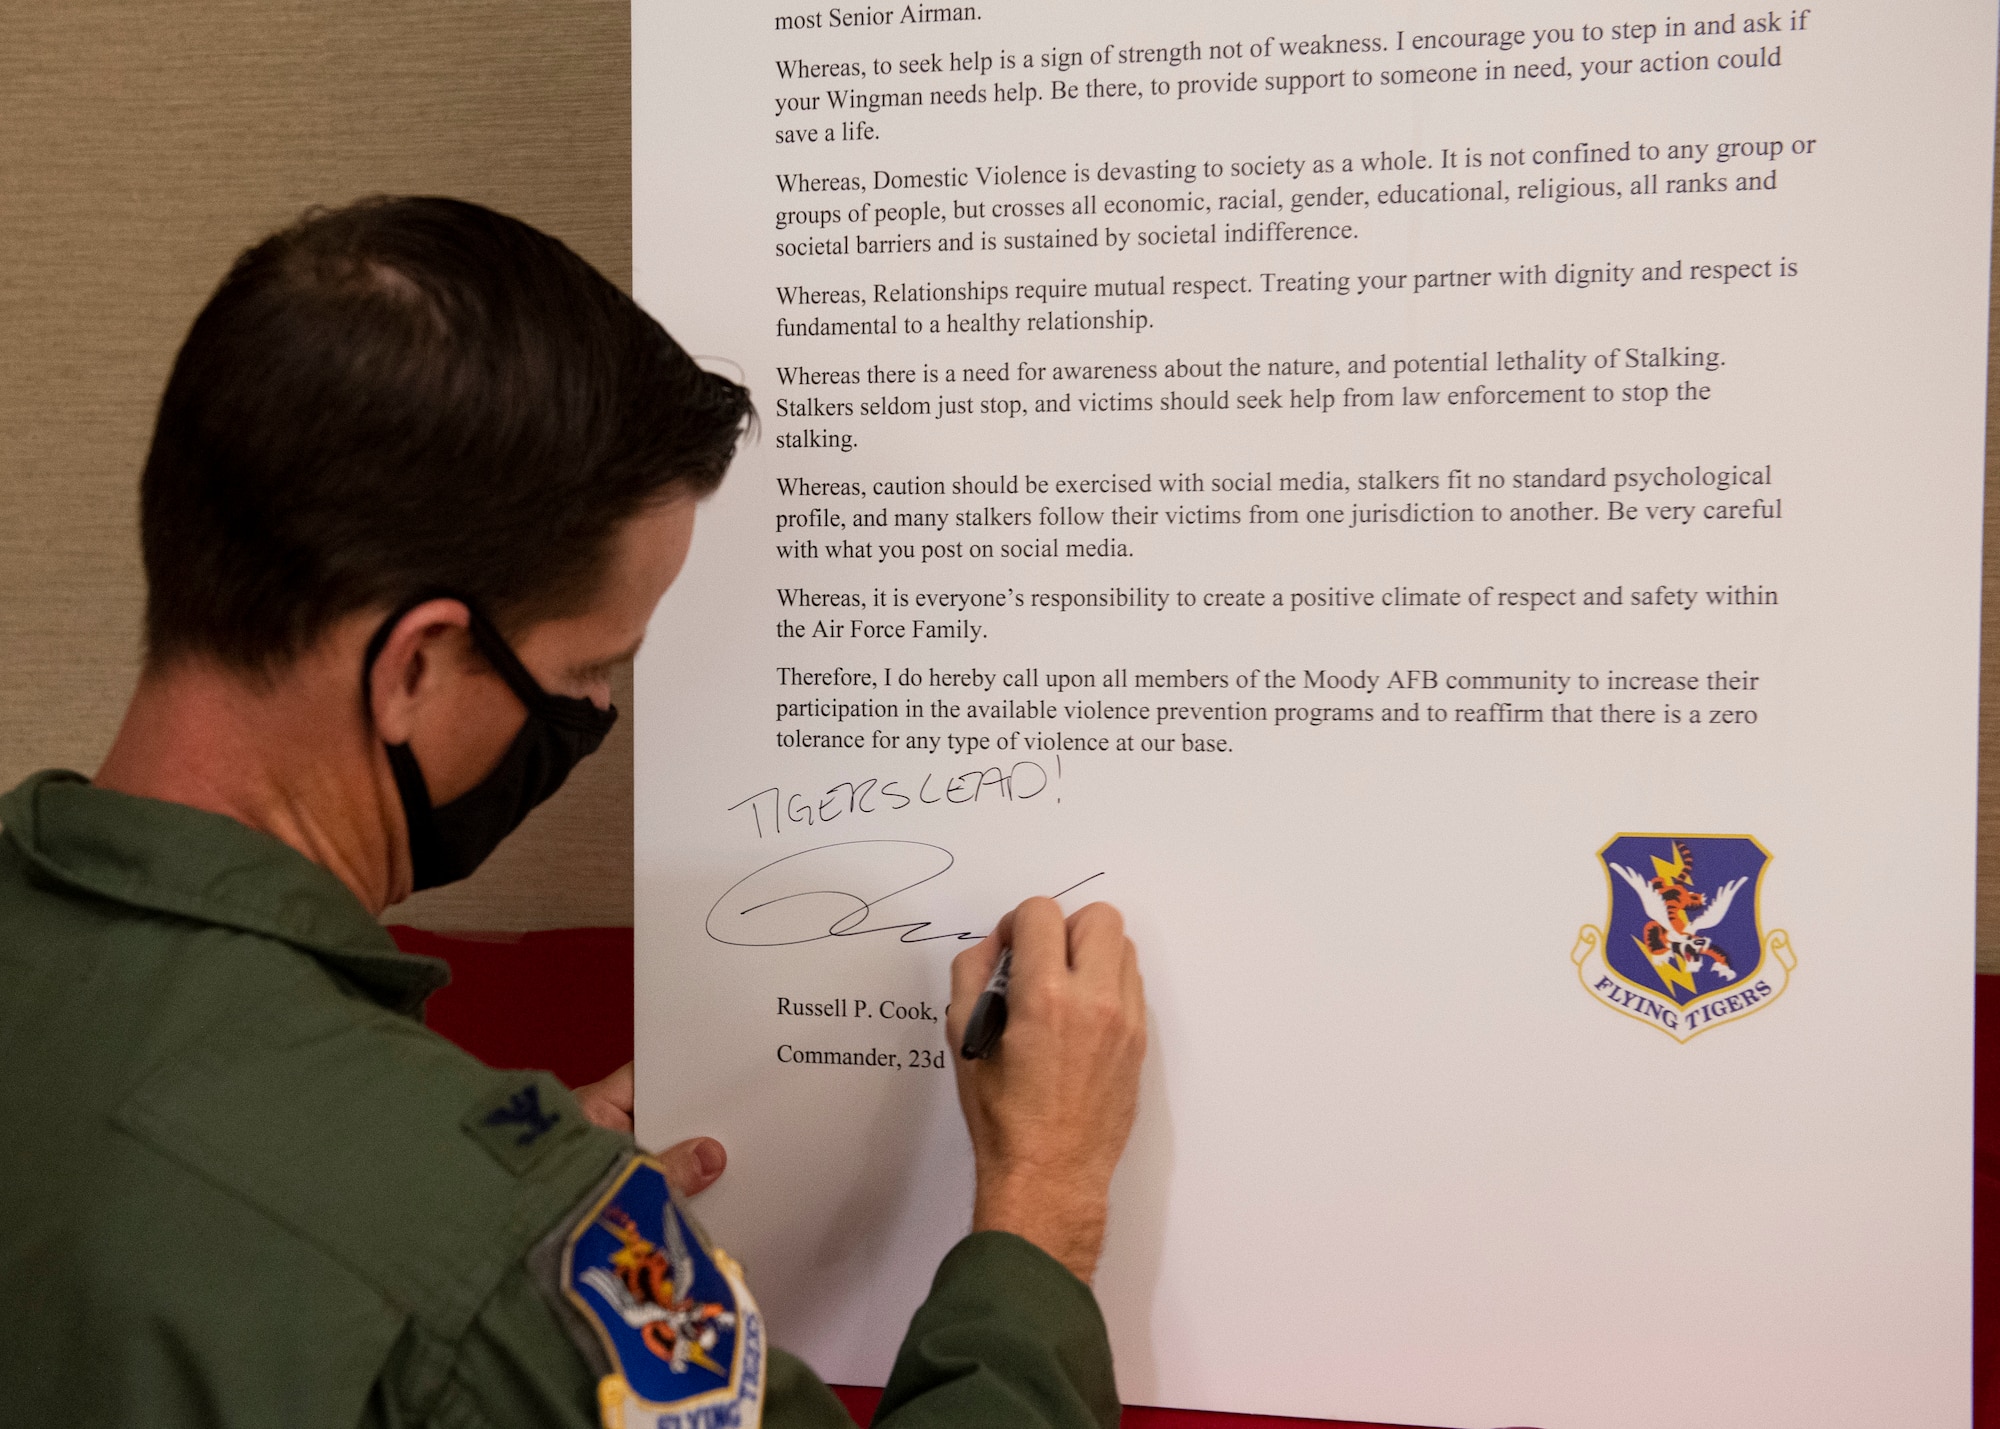 A commander signs a proclamation